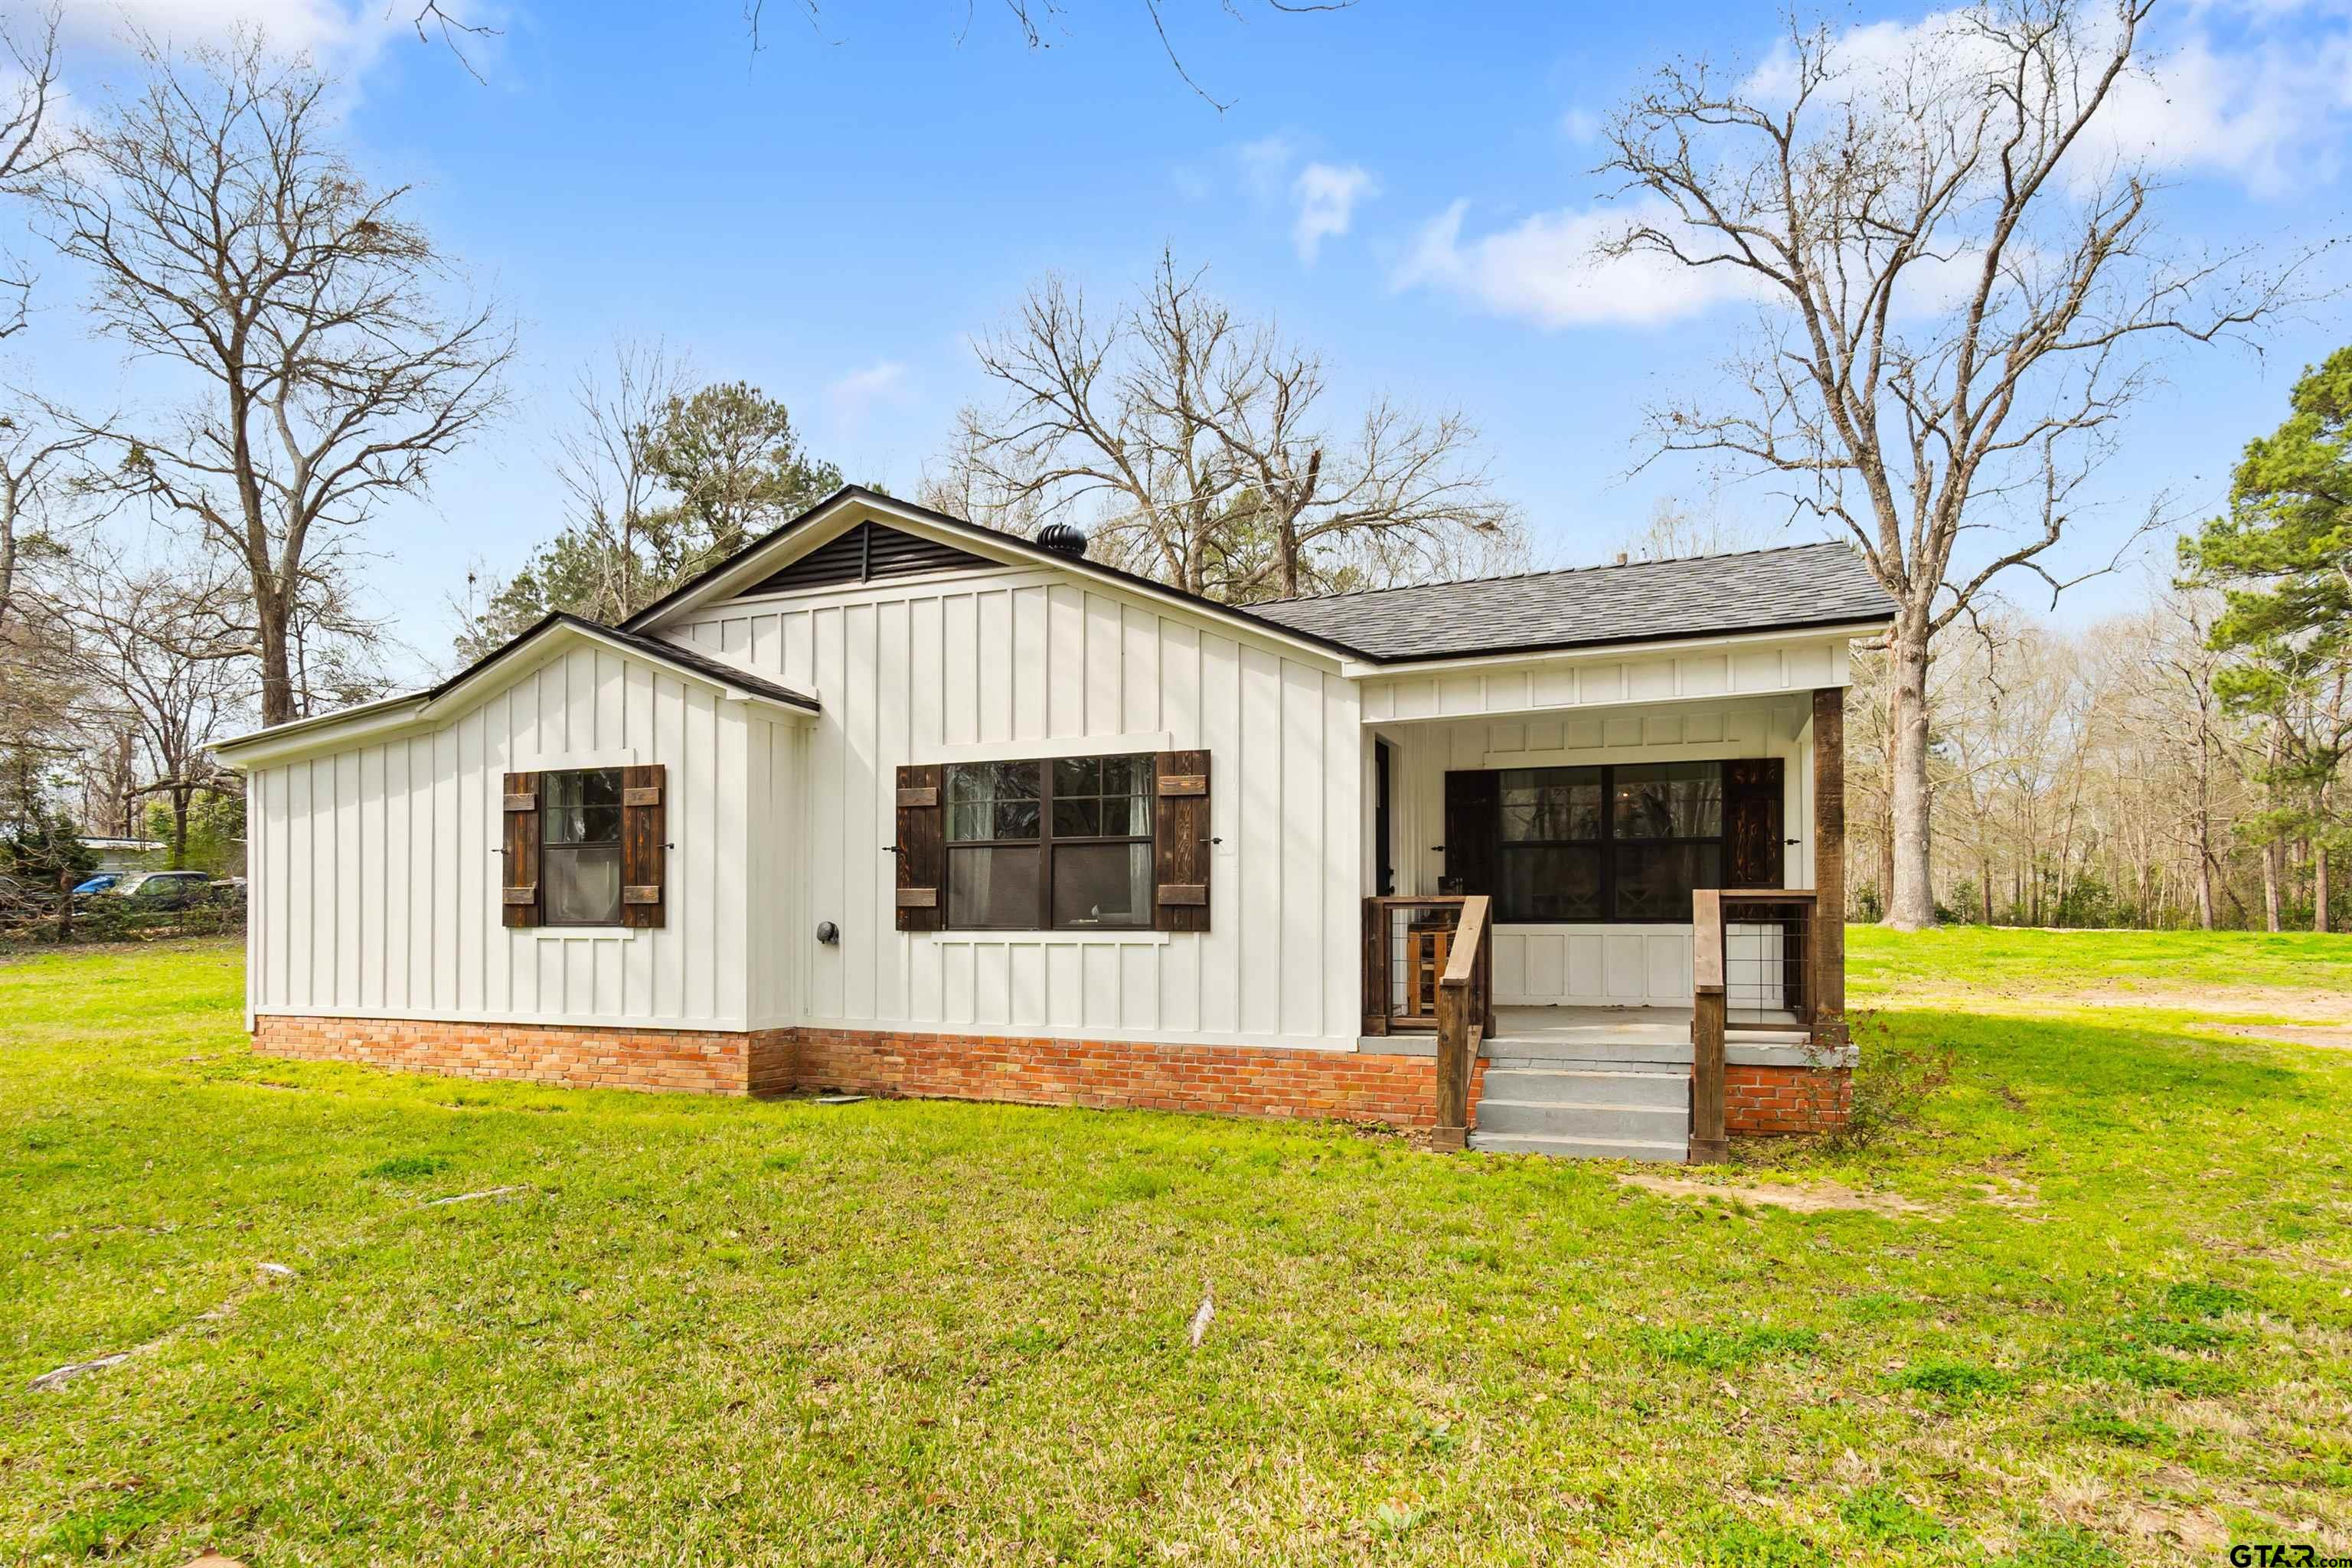 232 FM 1248, Rusk, Texas 75785, 2 Bedrooms Bedrooms, ,2 BathroomsBathrooms,Single Family Detached,For Sale,FM 1248,24002884